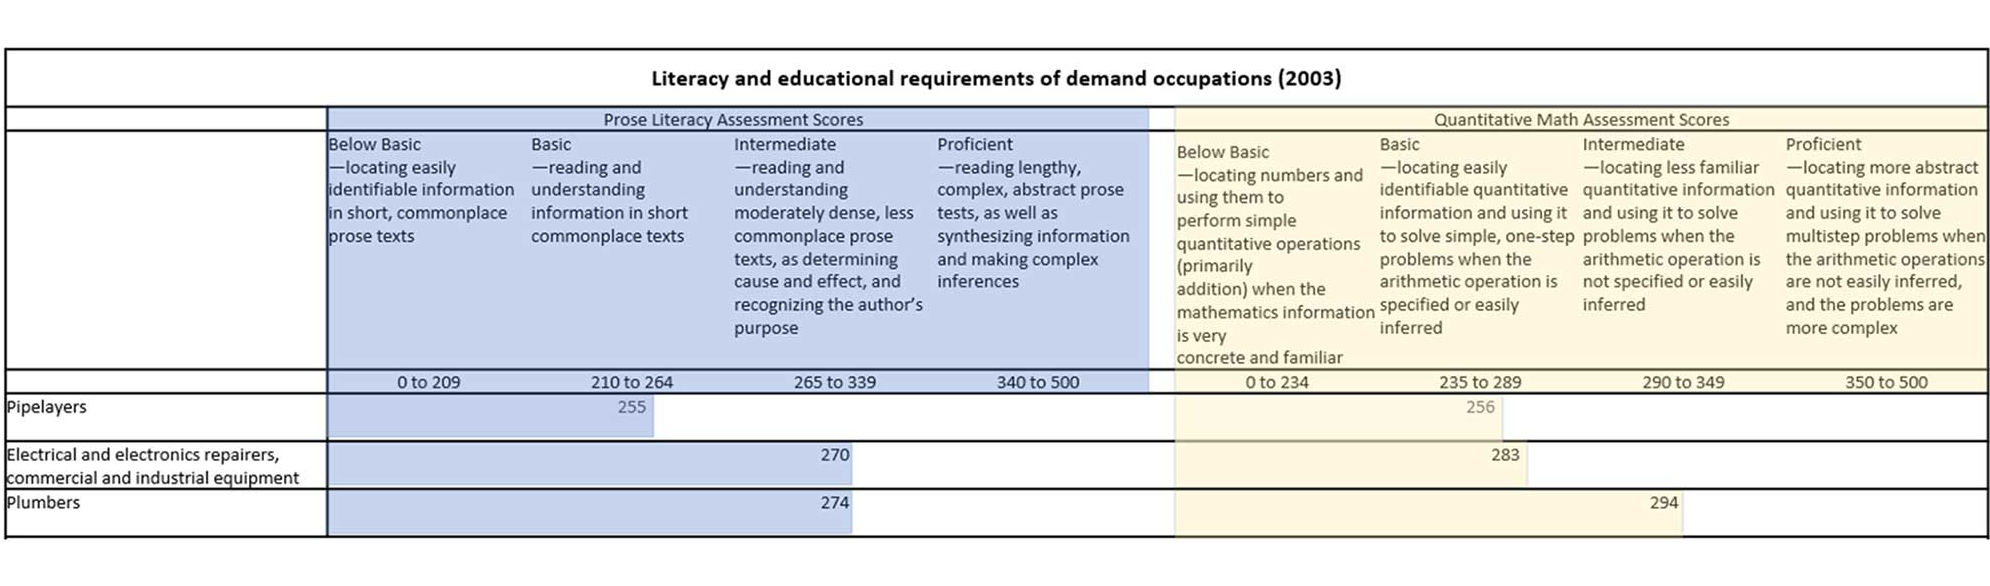 literacy and educational requirements